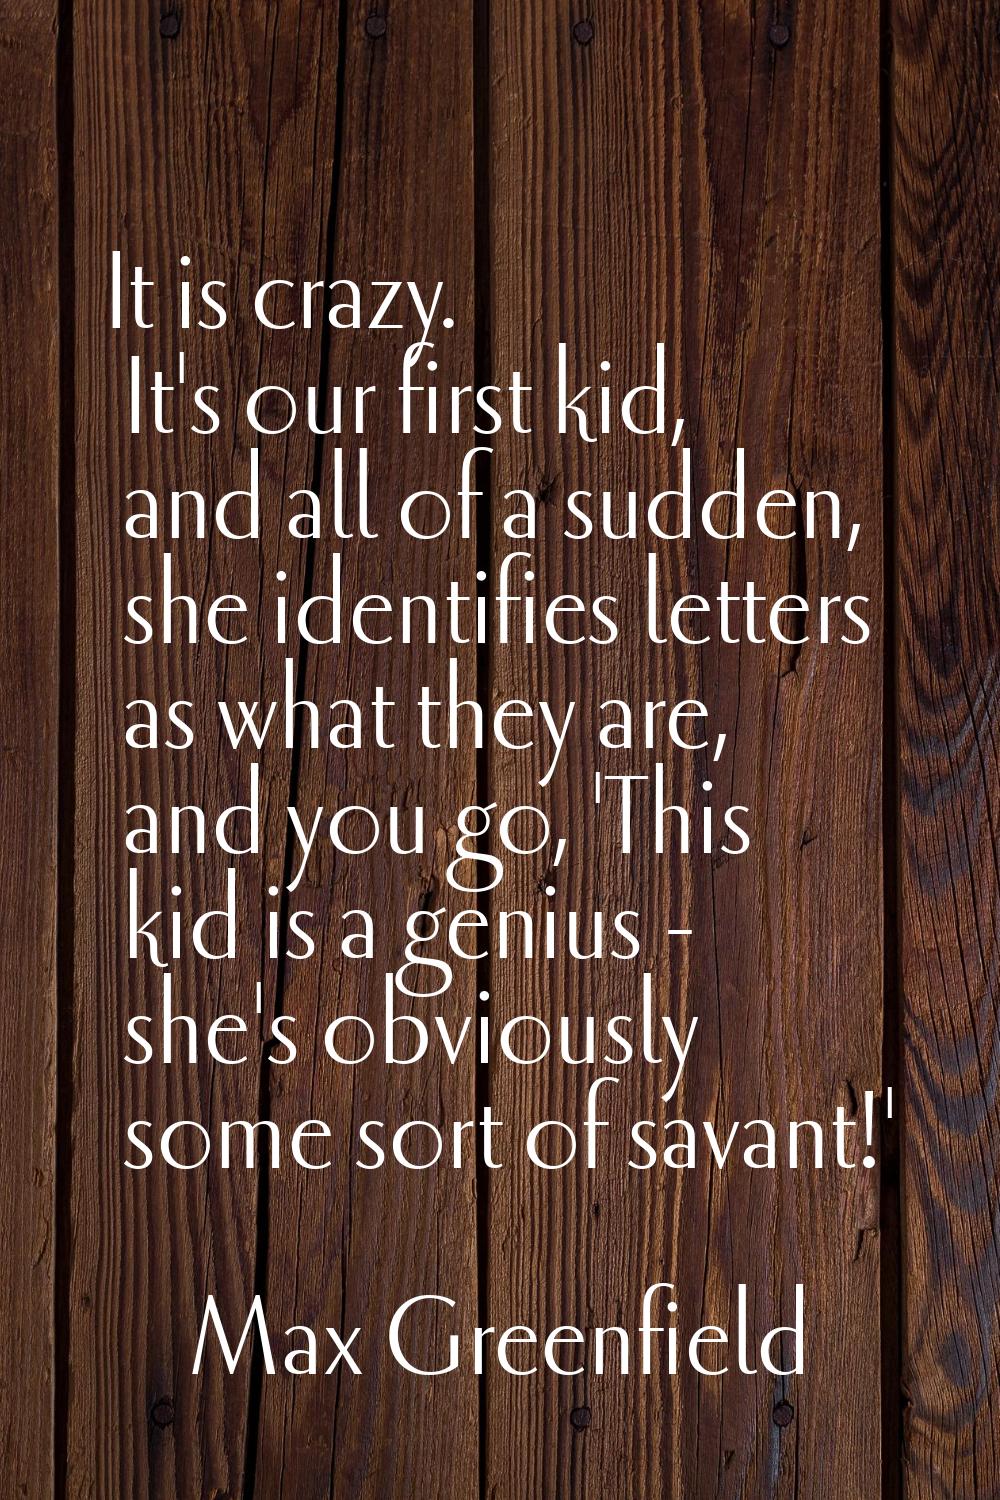 It is crazy. It's our first kid, and all of a sudden, she identifies letters as what they are, and 